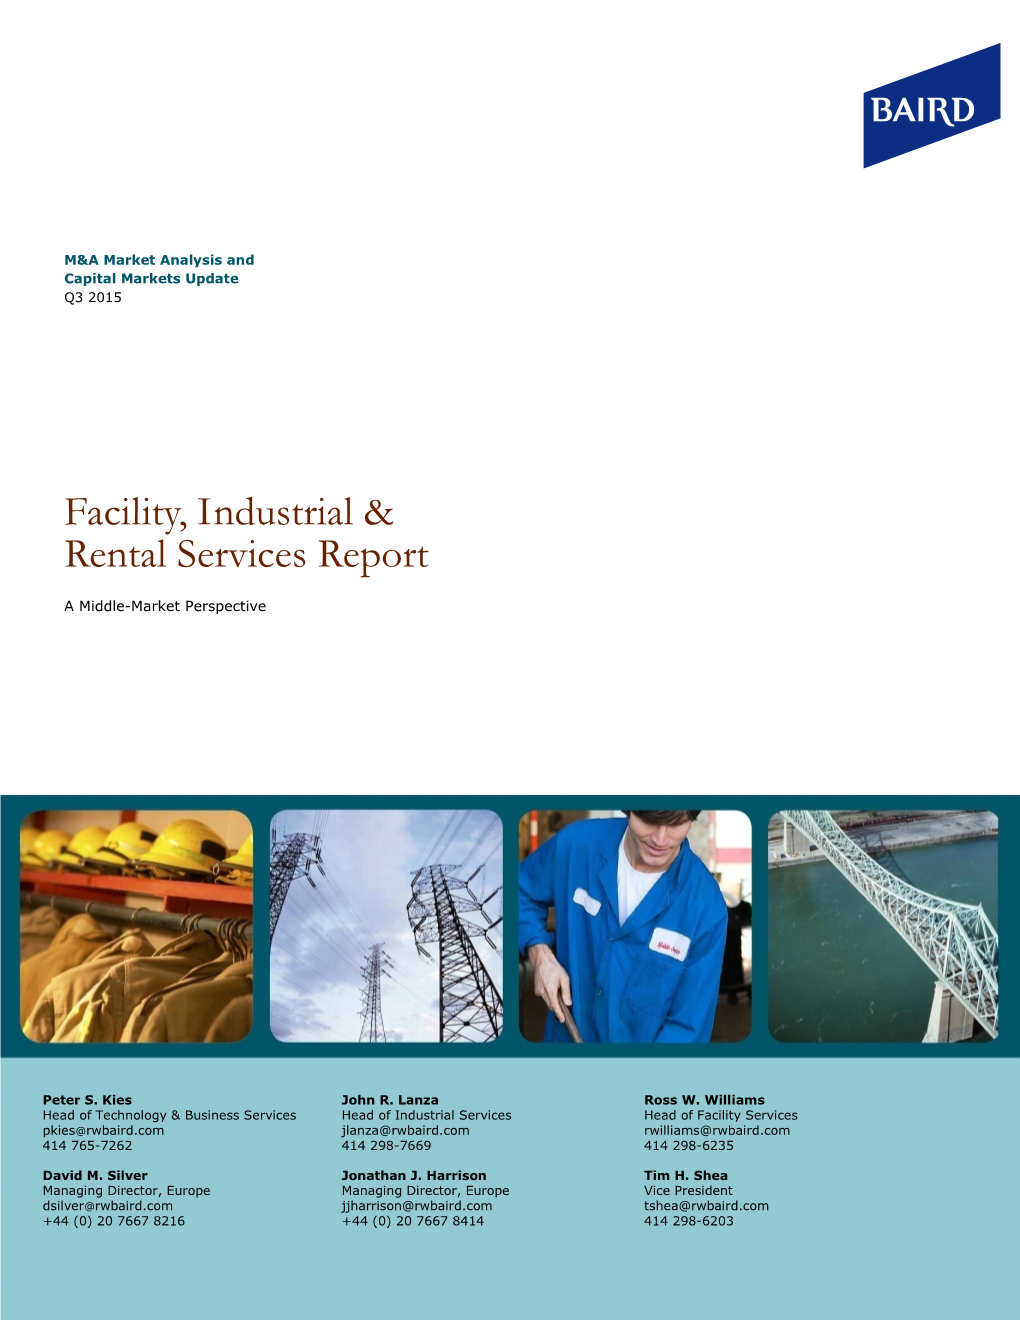 Facility, Industrial & Rental Services Report